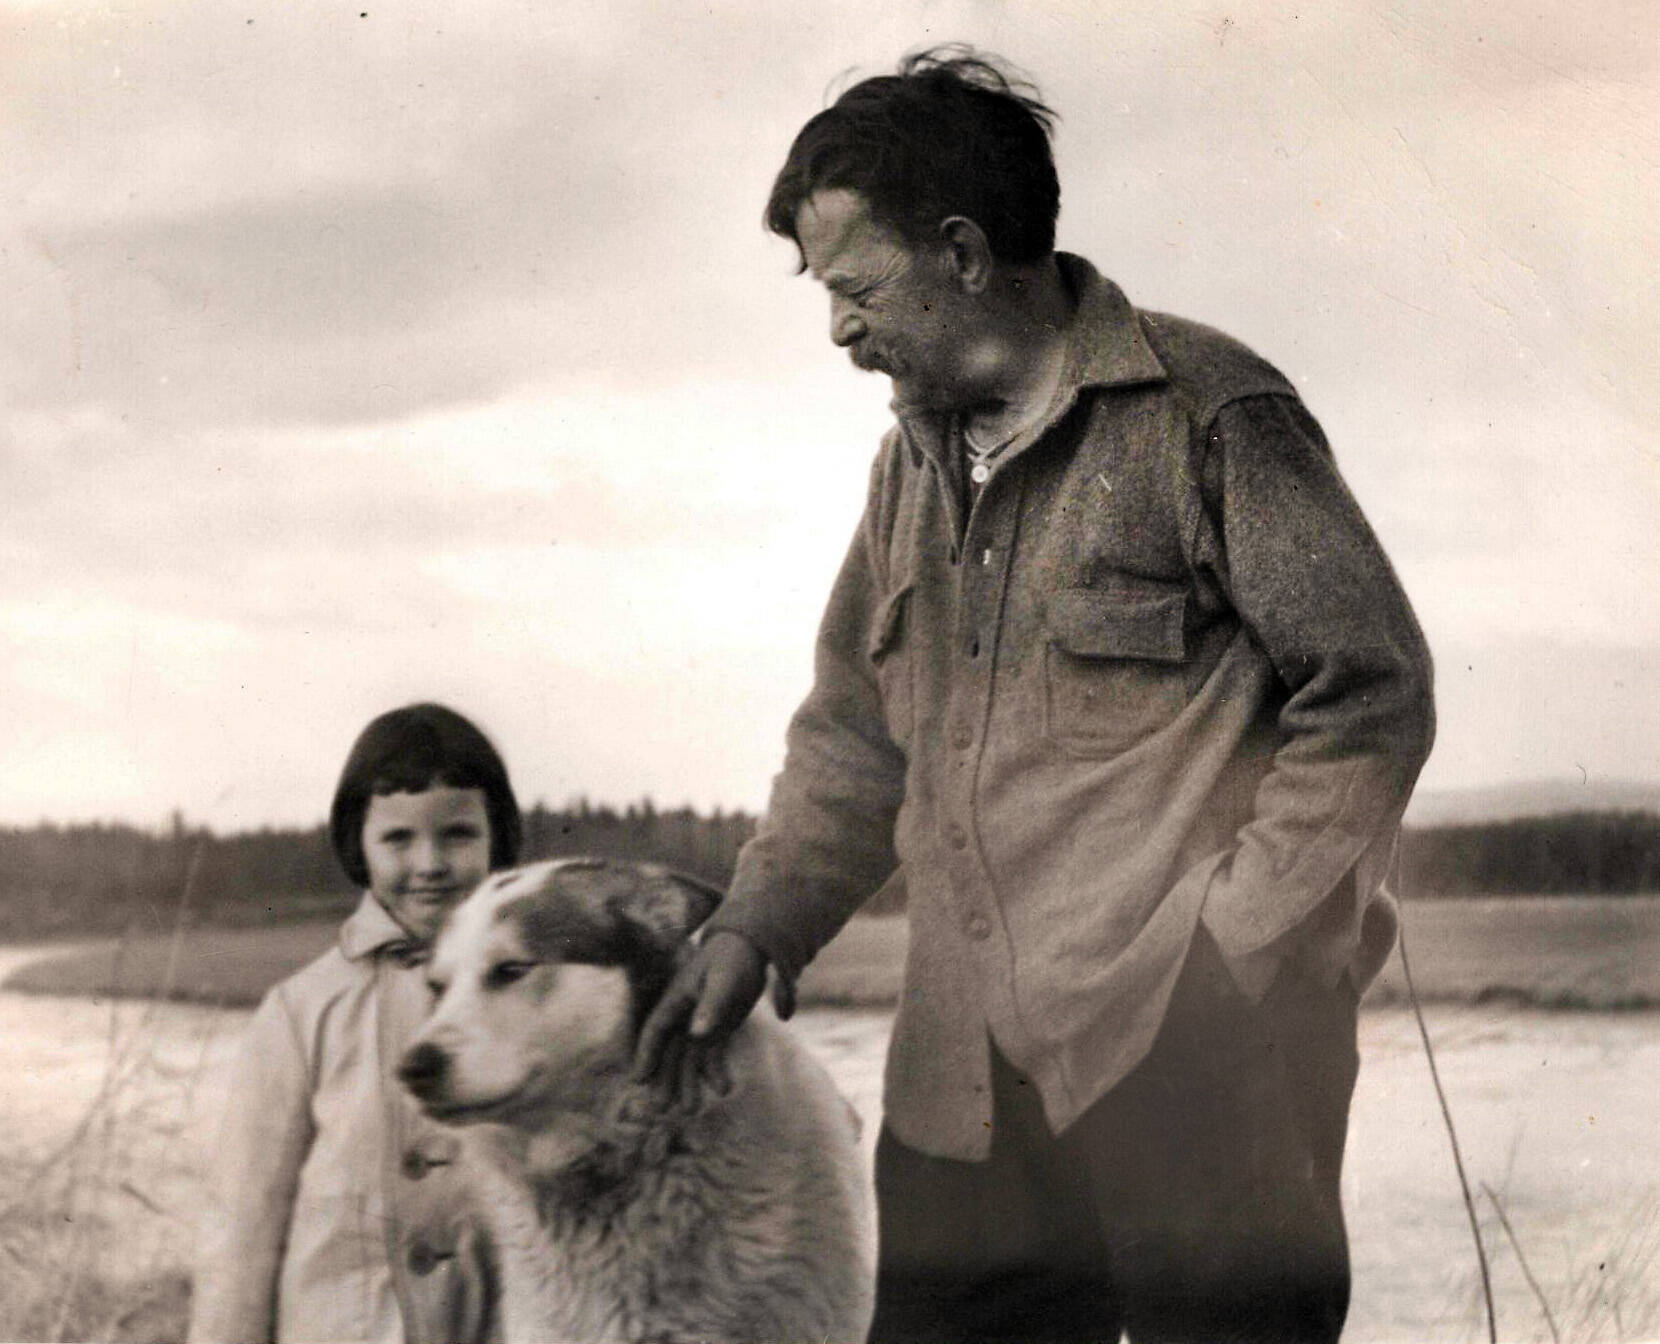 In this Knackstedt Collection photo, probably from circa the 1940s, Windy Wagner enjoys the company of young Lori Lancashire and a friendly dog.